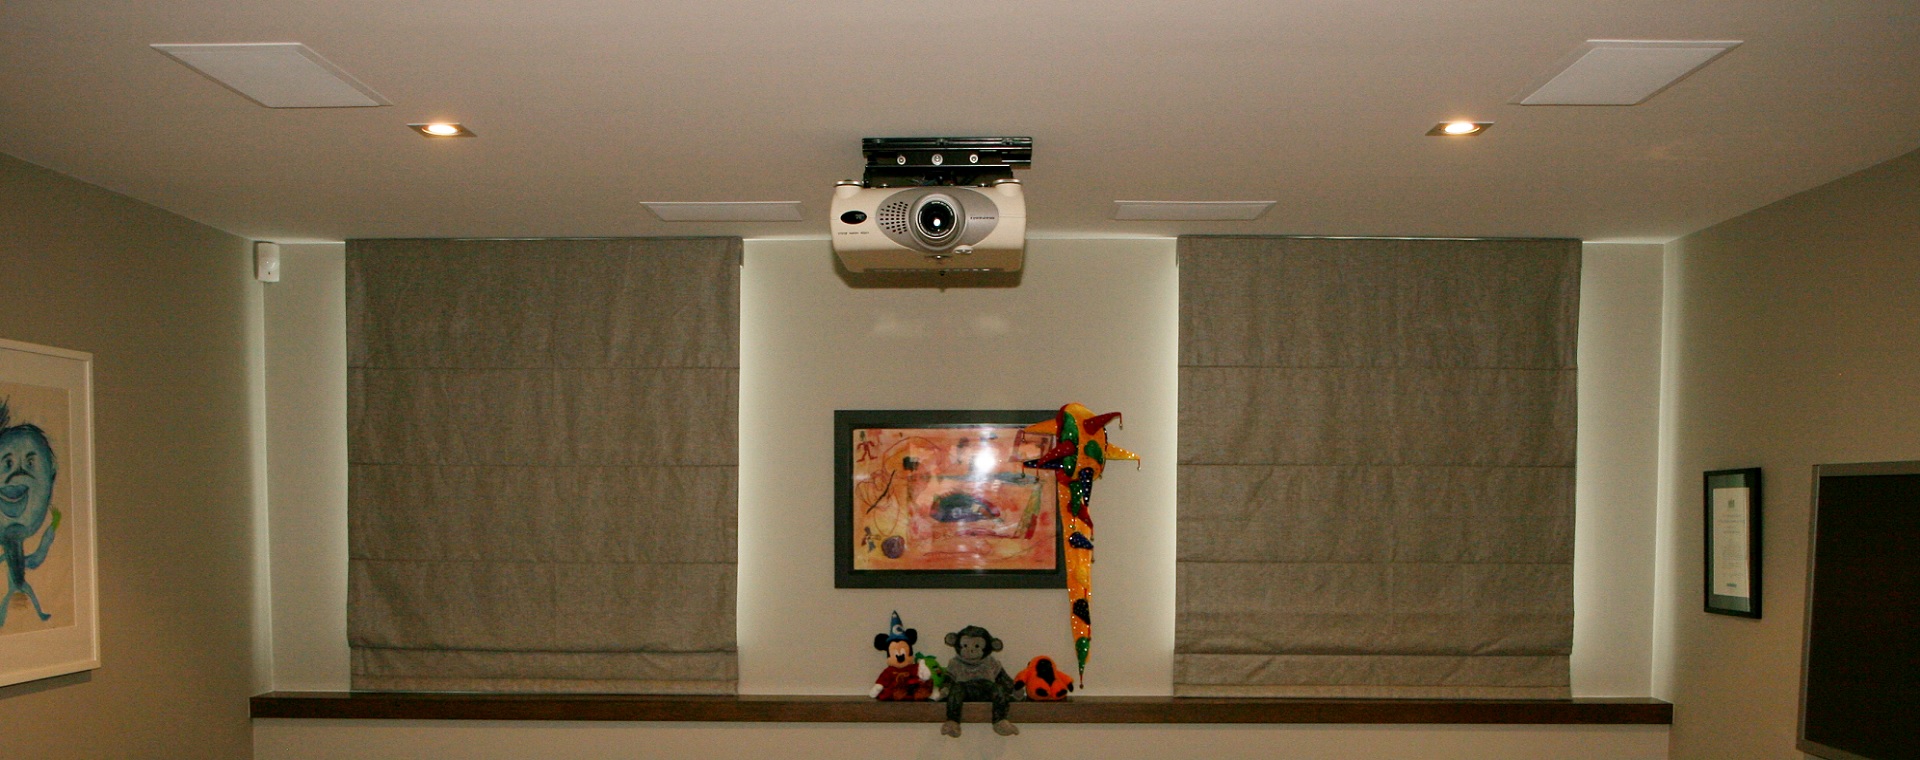 Home theatre with projector